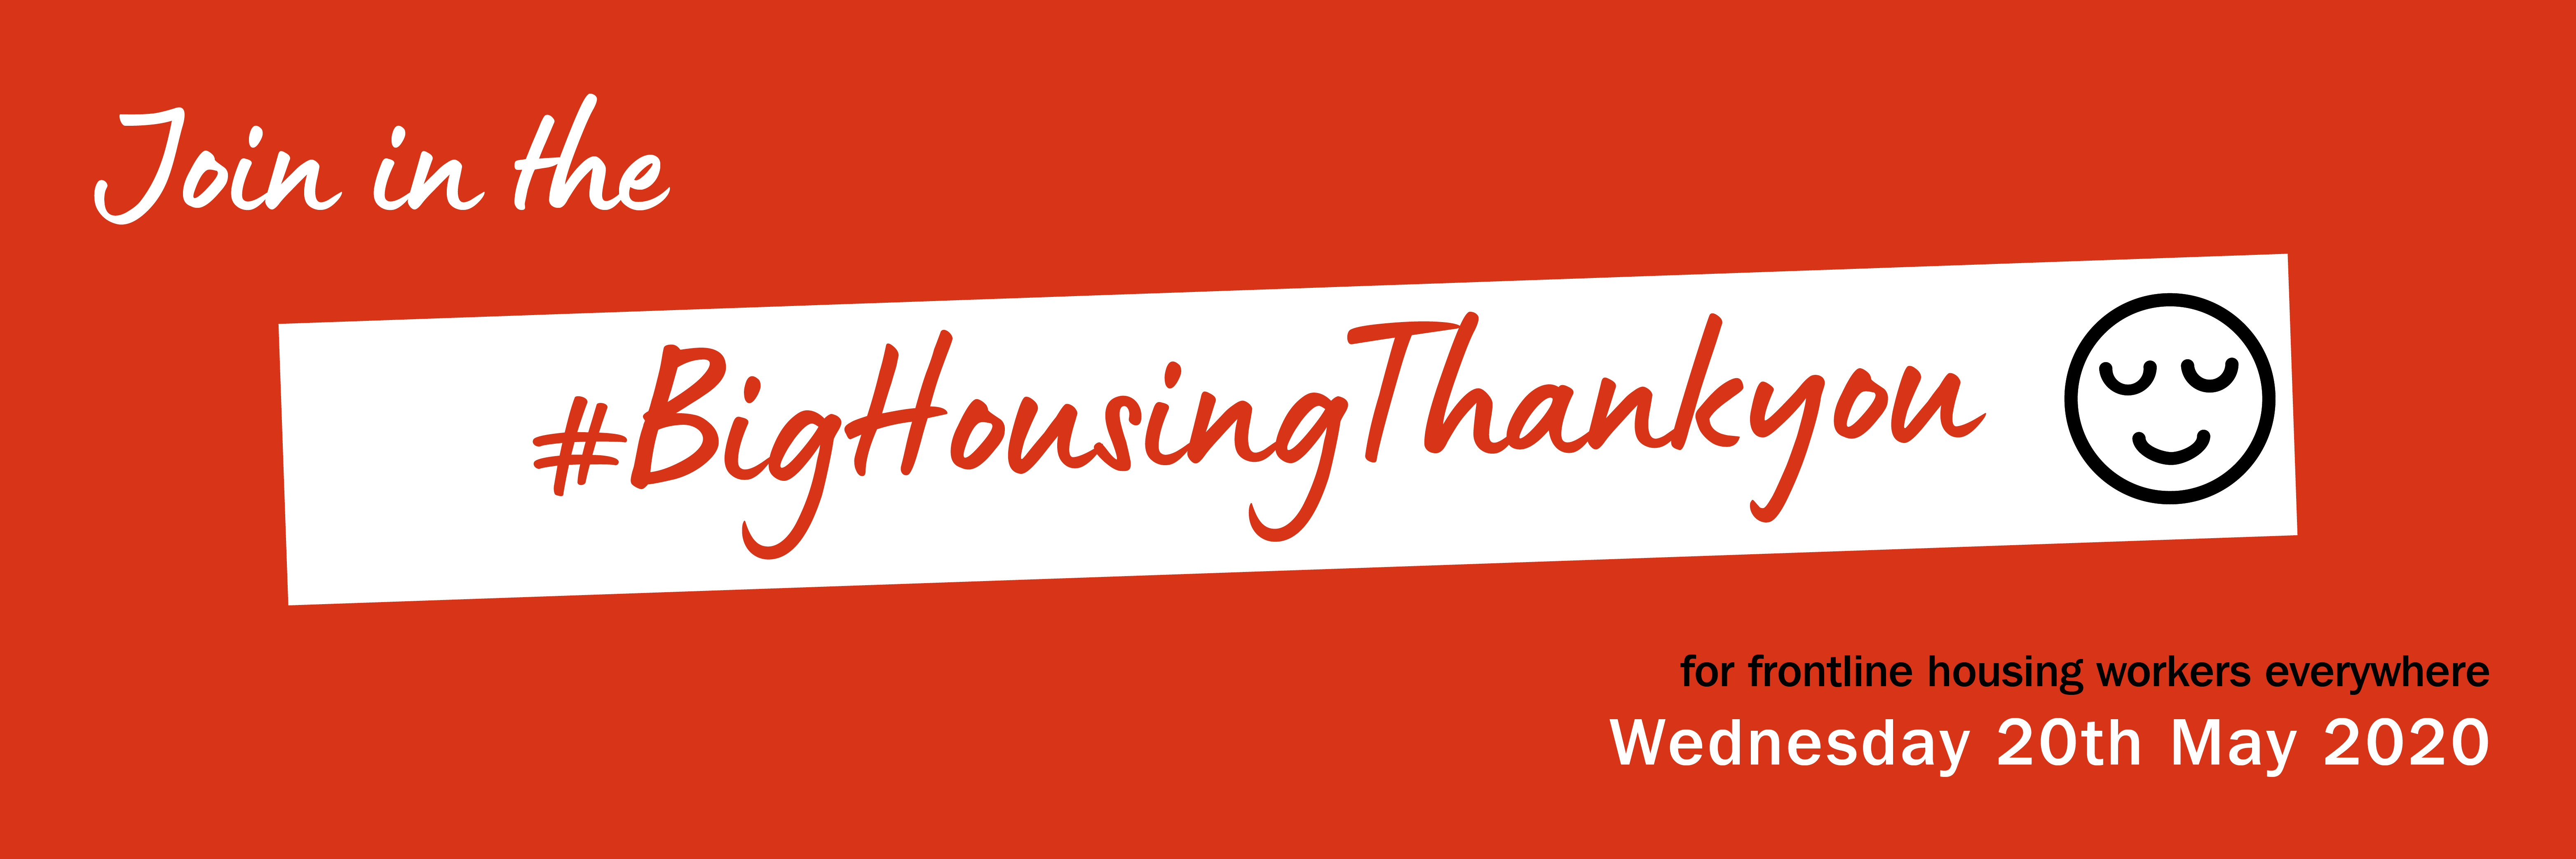 Big housing thank you Twitter banner - red